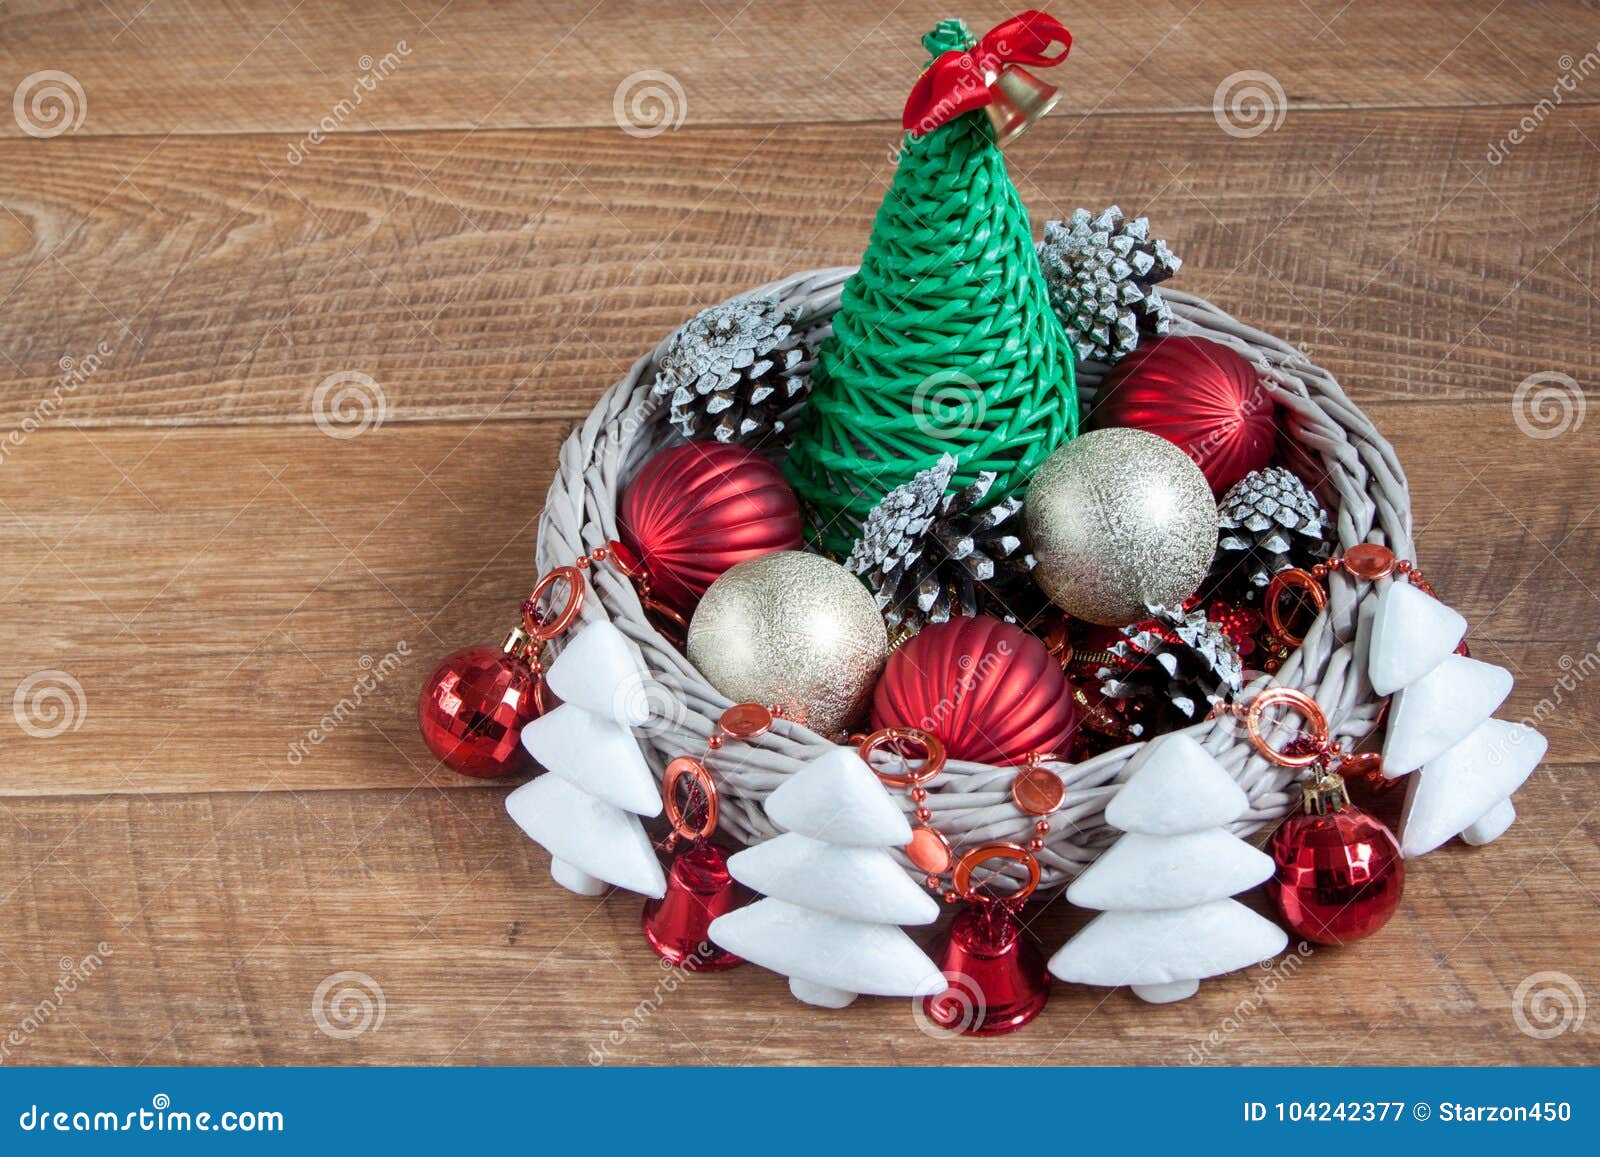 Decorations for Christmas and New Year. Stock Image - Image of ...